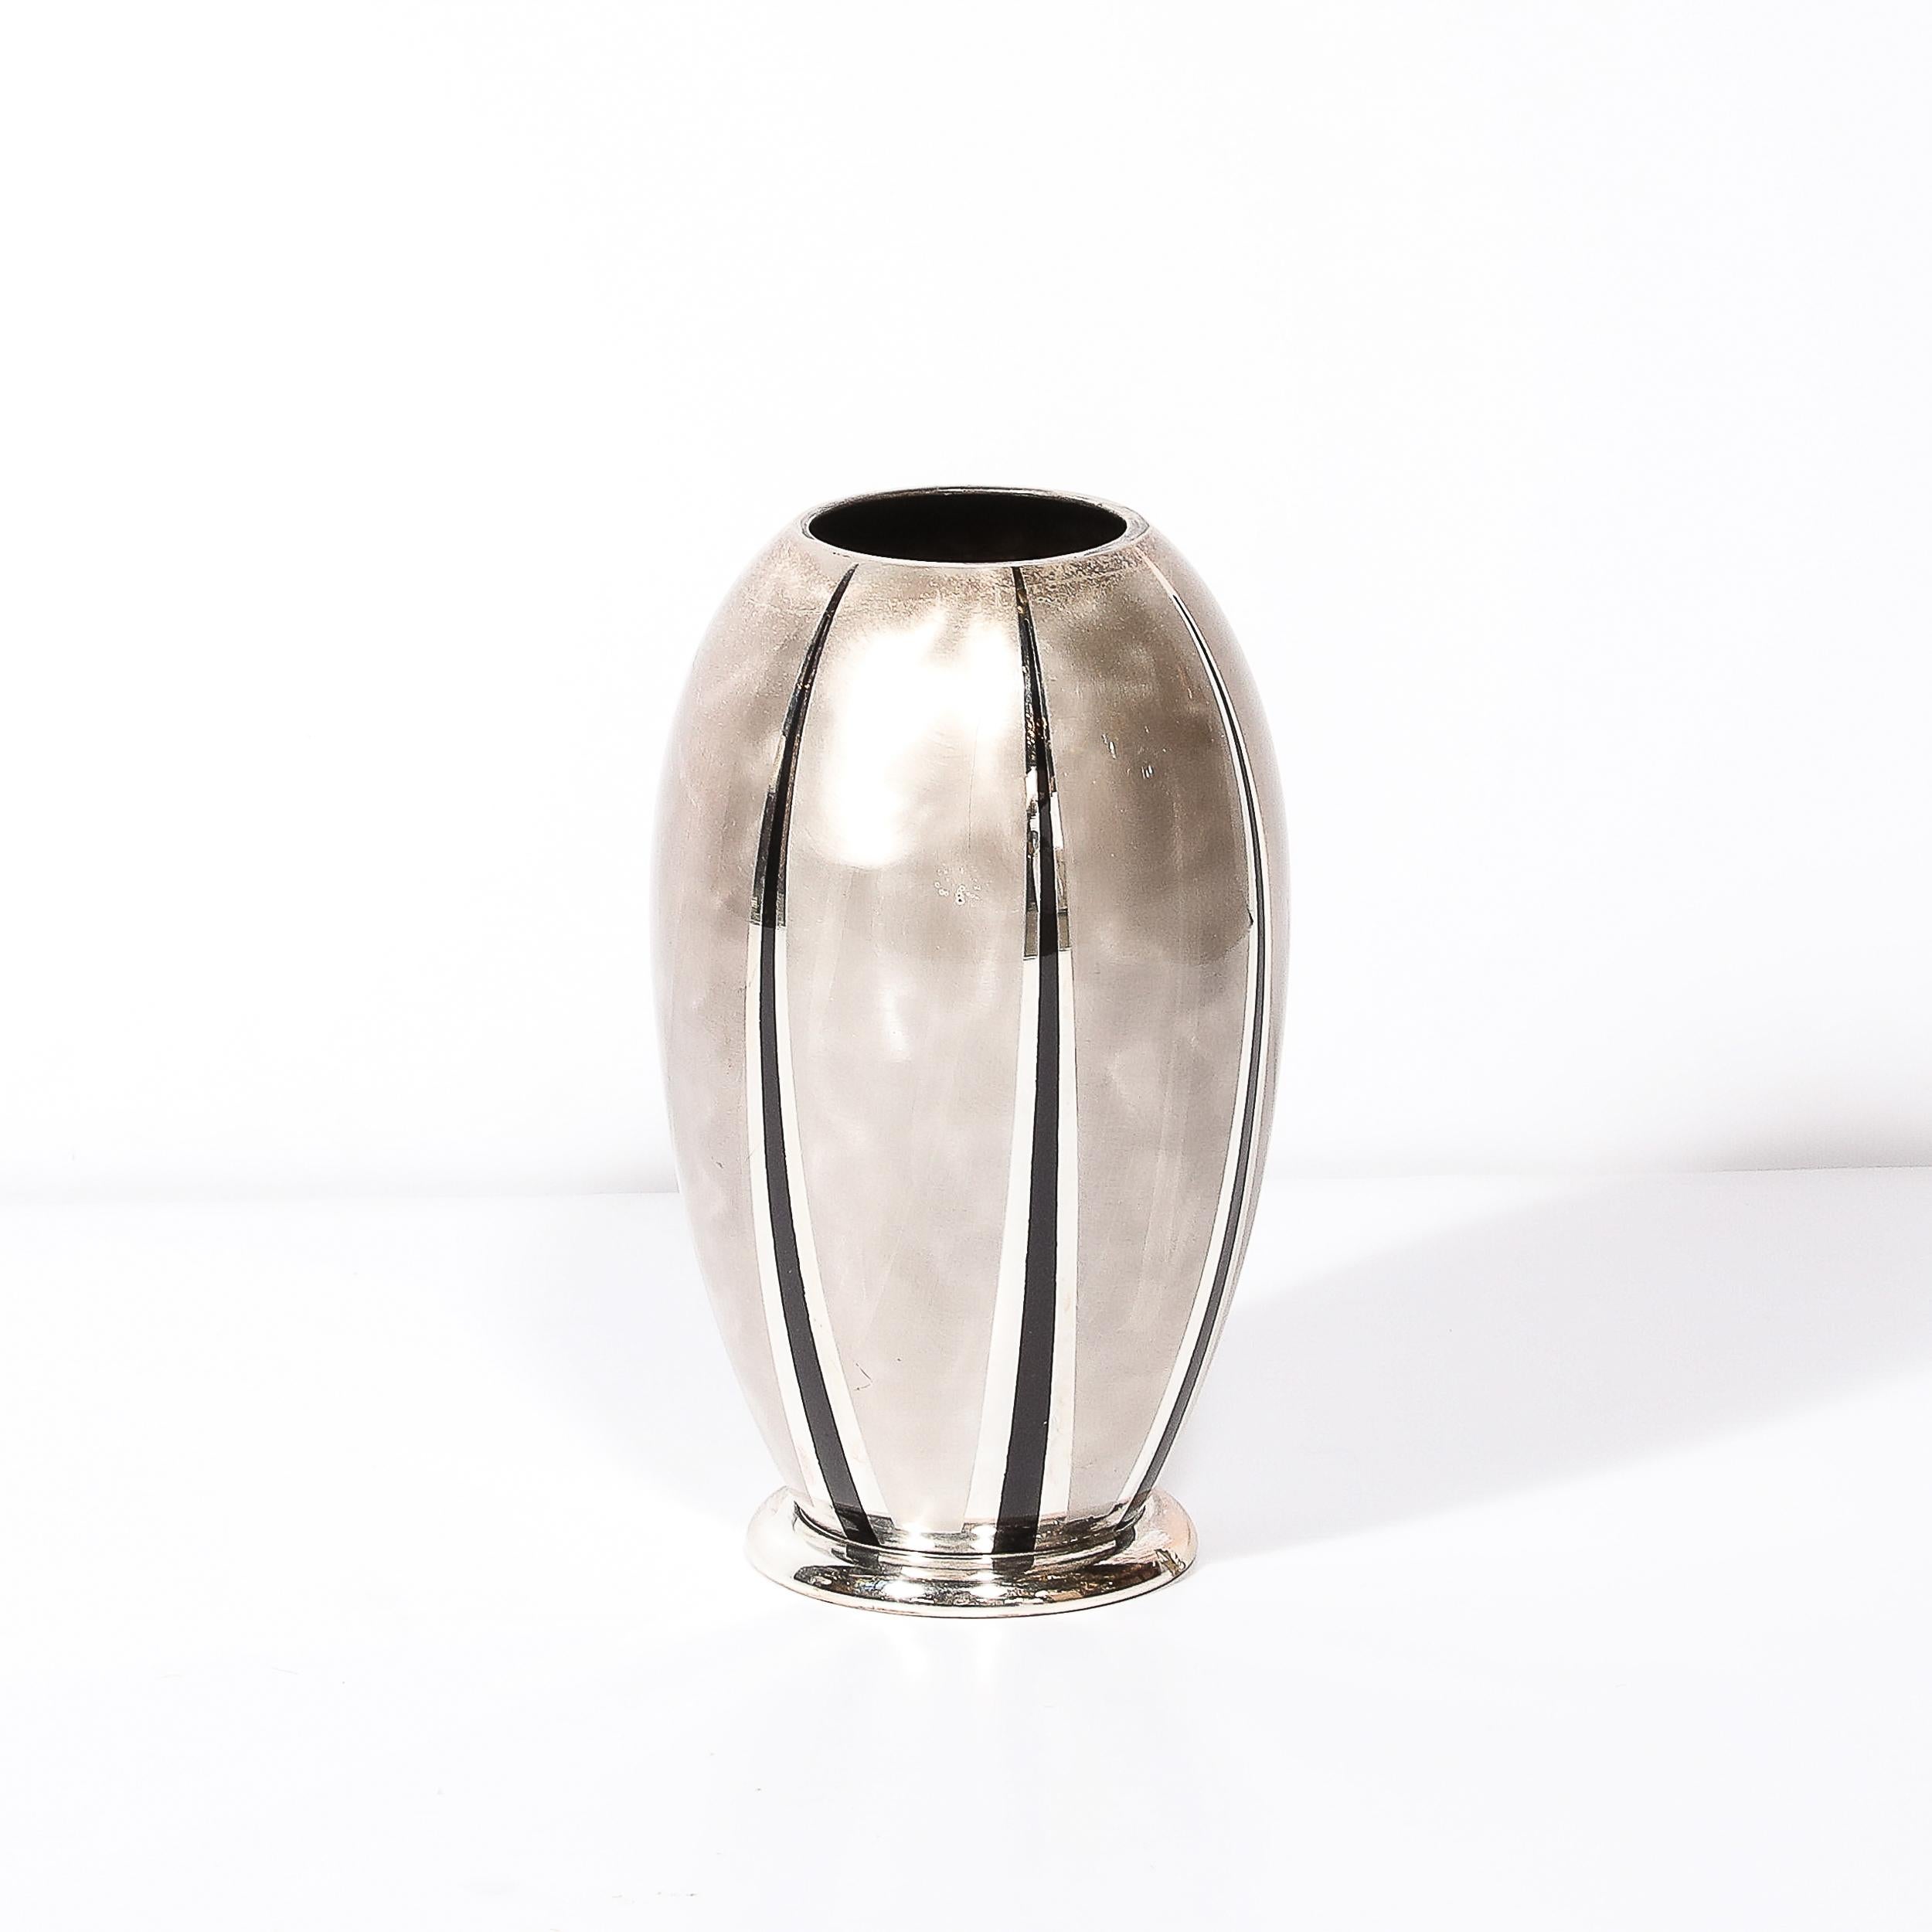 This well balanced and stunningly finished Art Deco MF Ikora Textural Silver Plated Vase W/ Jet Black Linear Detailing originates from Germany, Circa 1935. Featuring and urn form rounded composition resting on a cylindrical base, the piece features